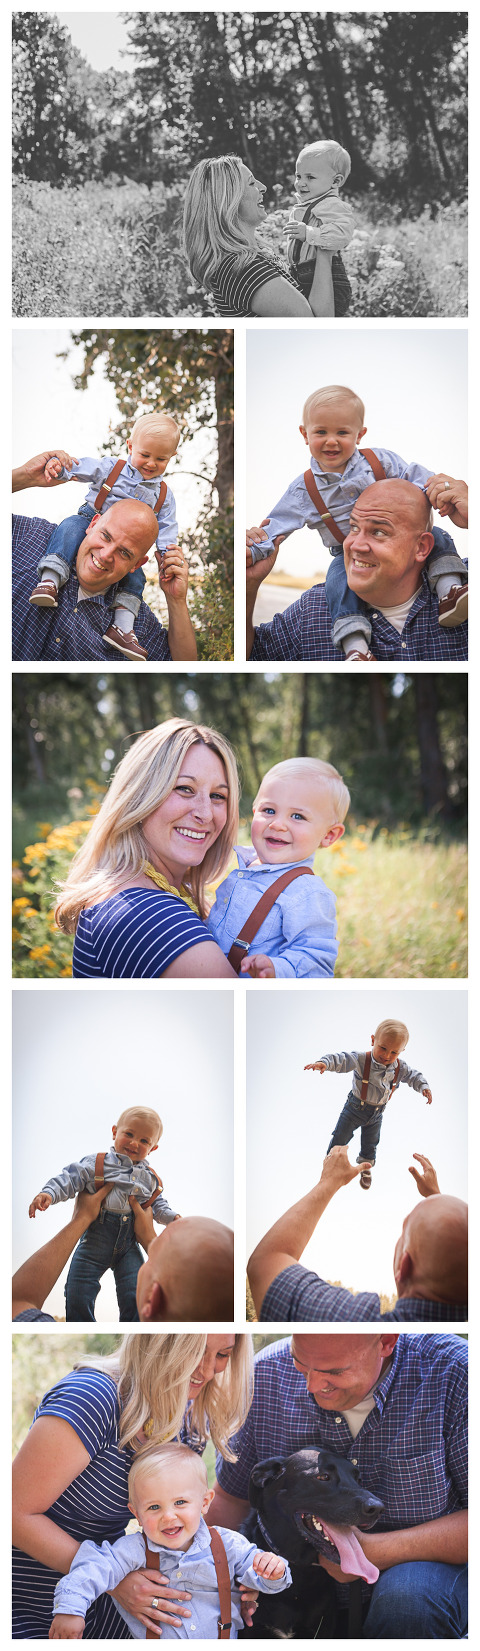 Lane Turns One Lifestyle family session with Hailey haberman in Ellensburg WA 